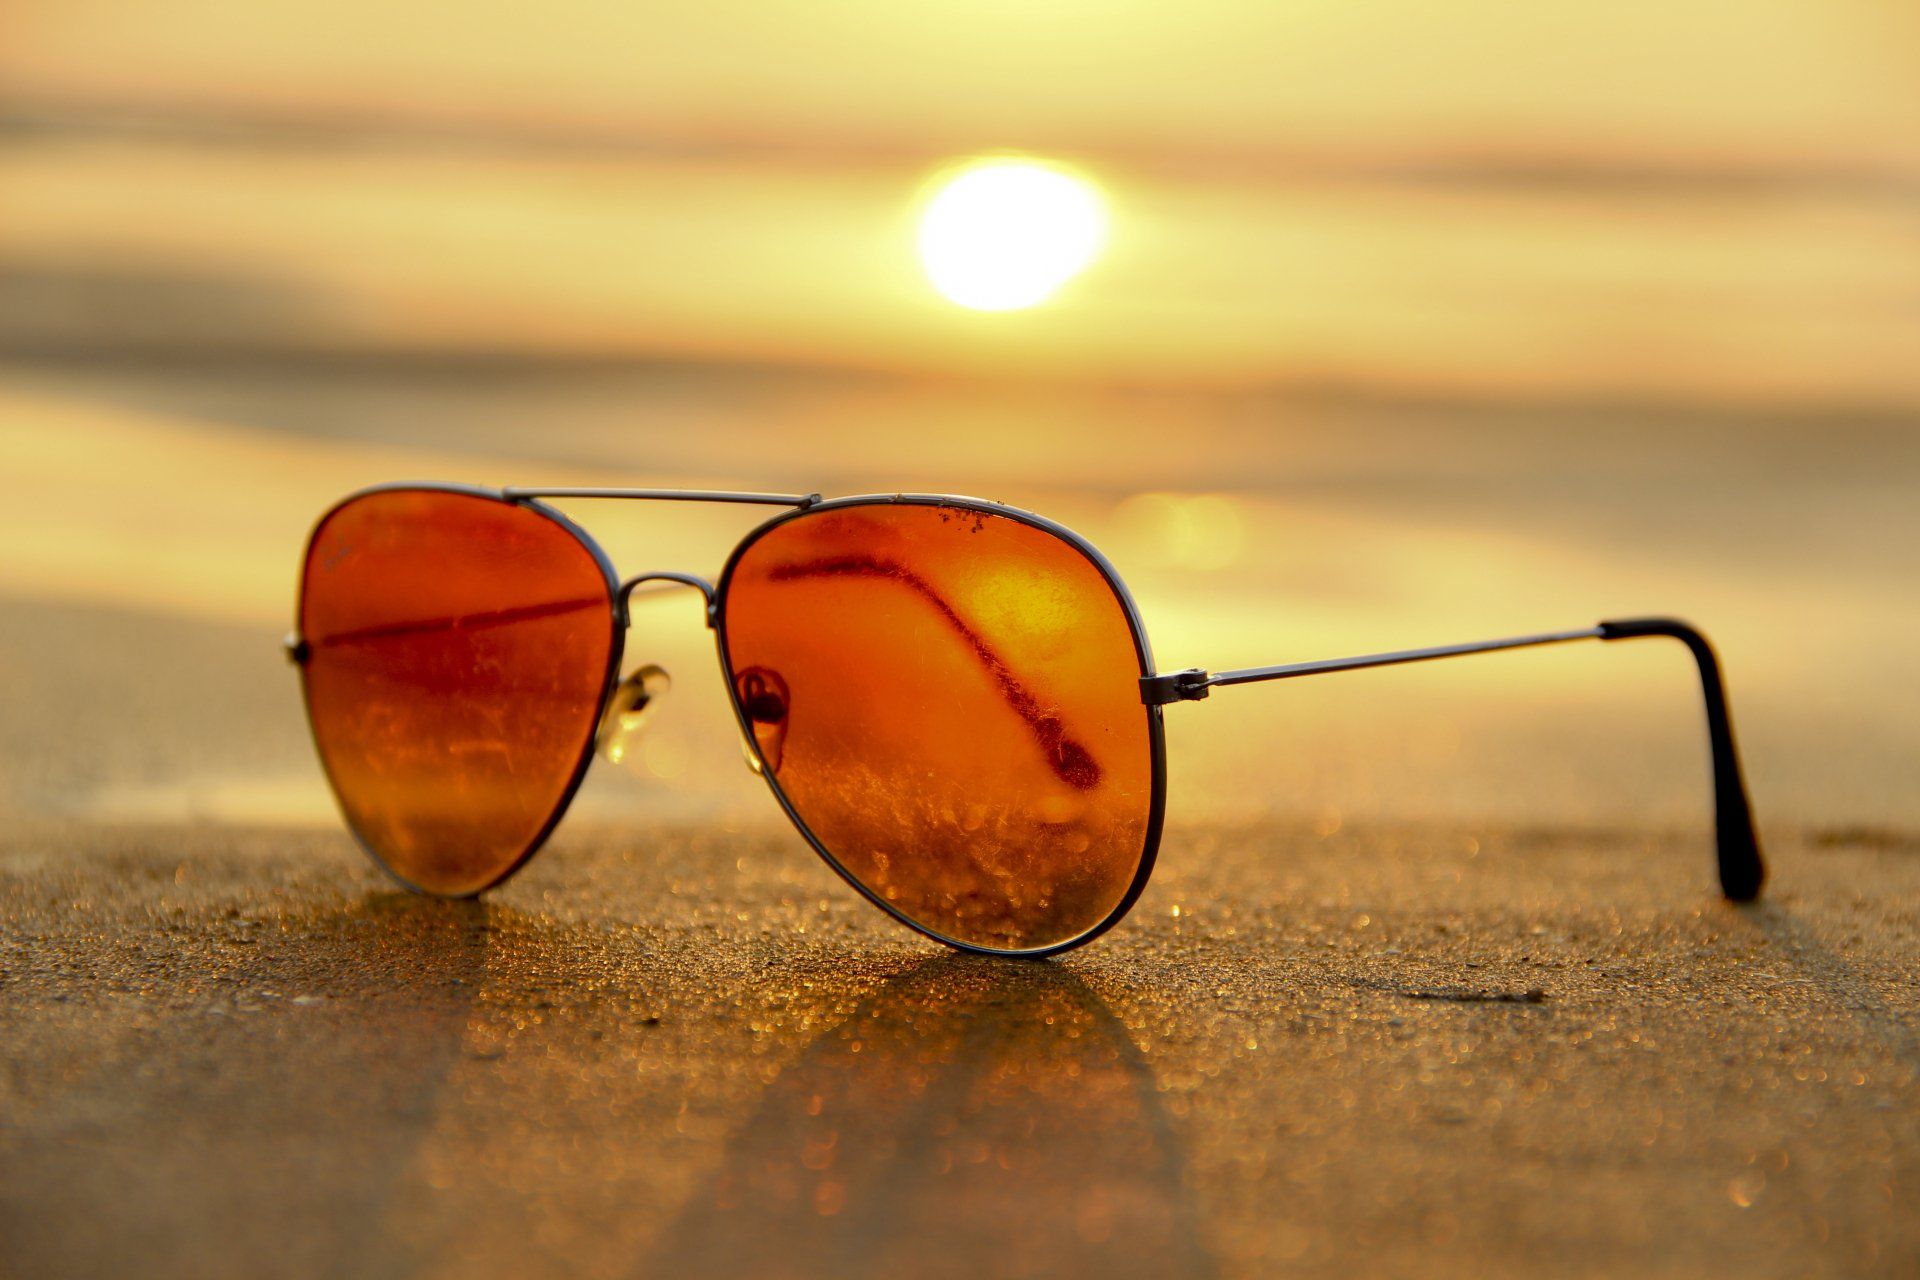 Pair of sunglasses on a sandy beach at sunset